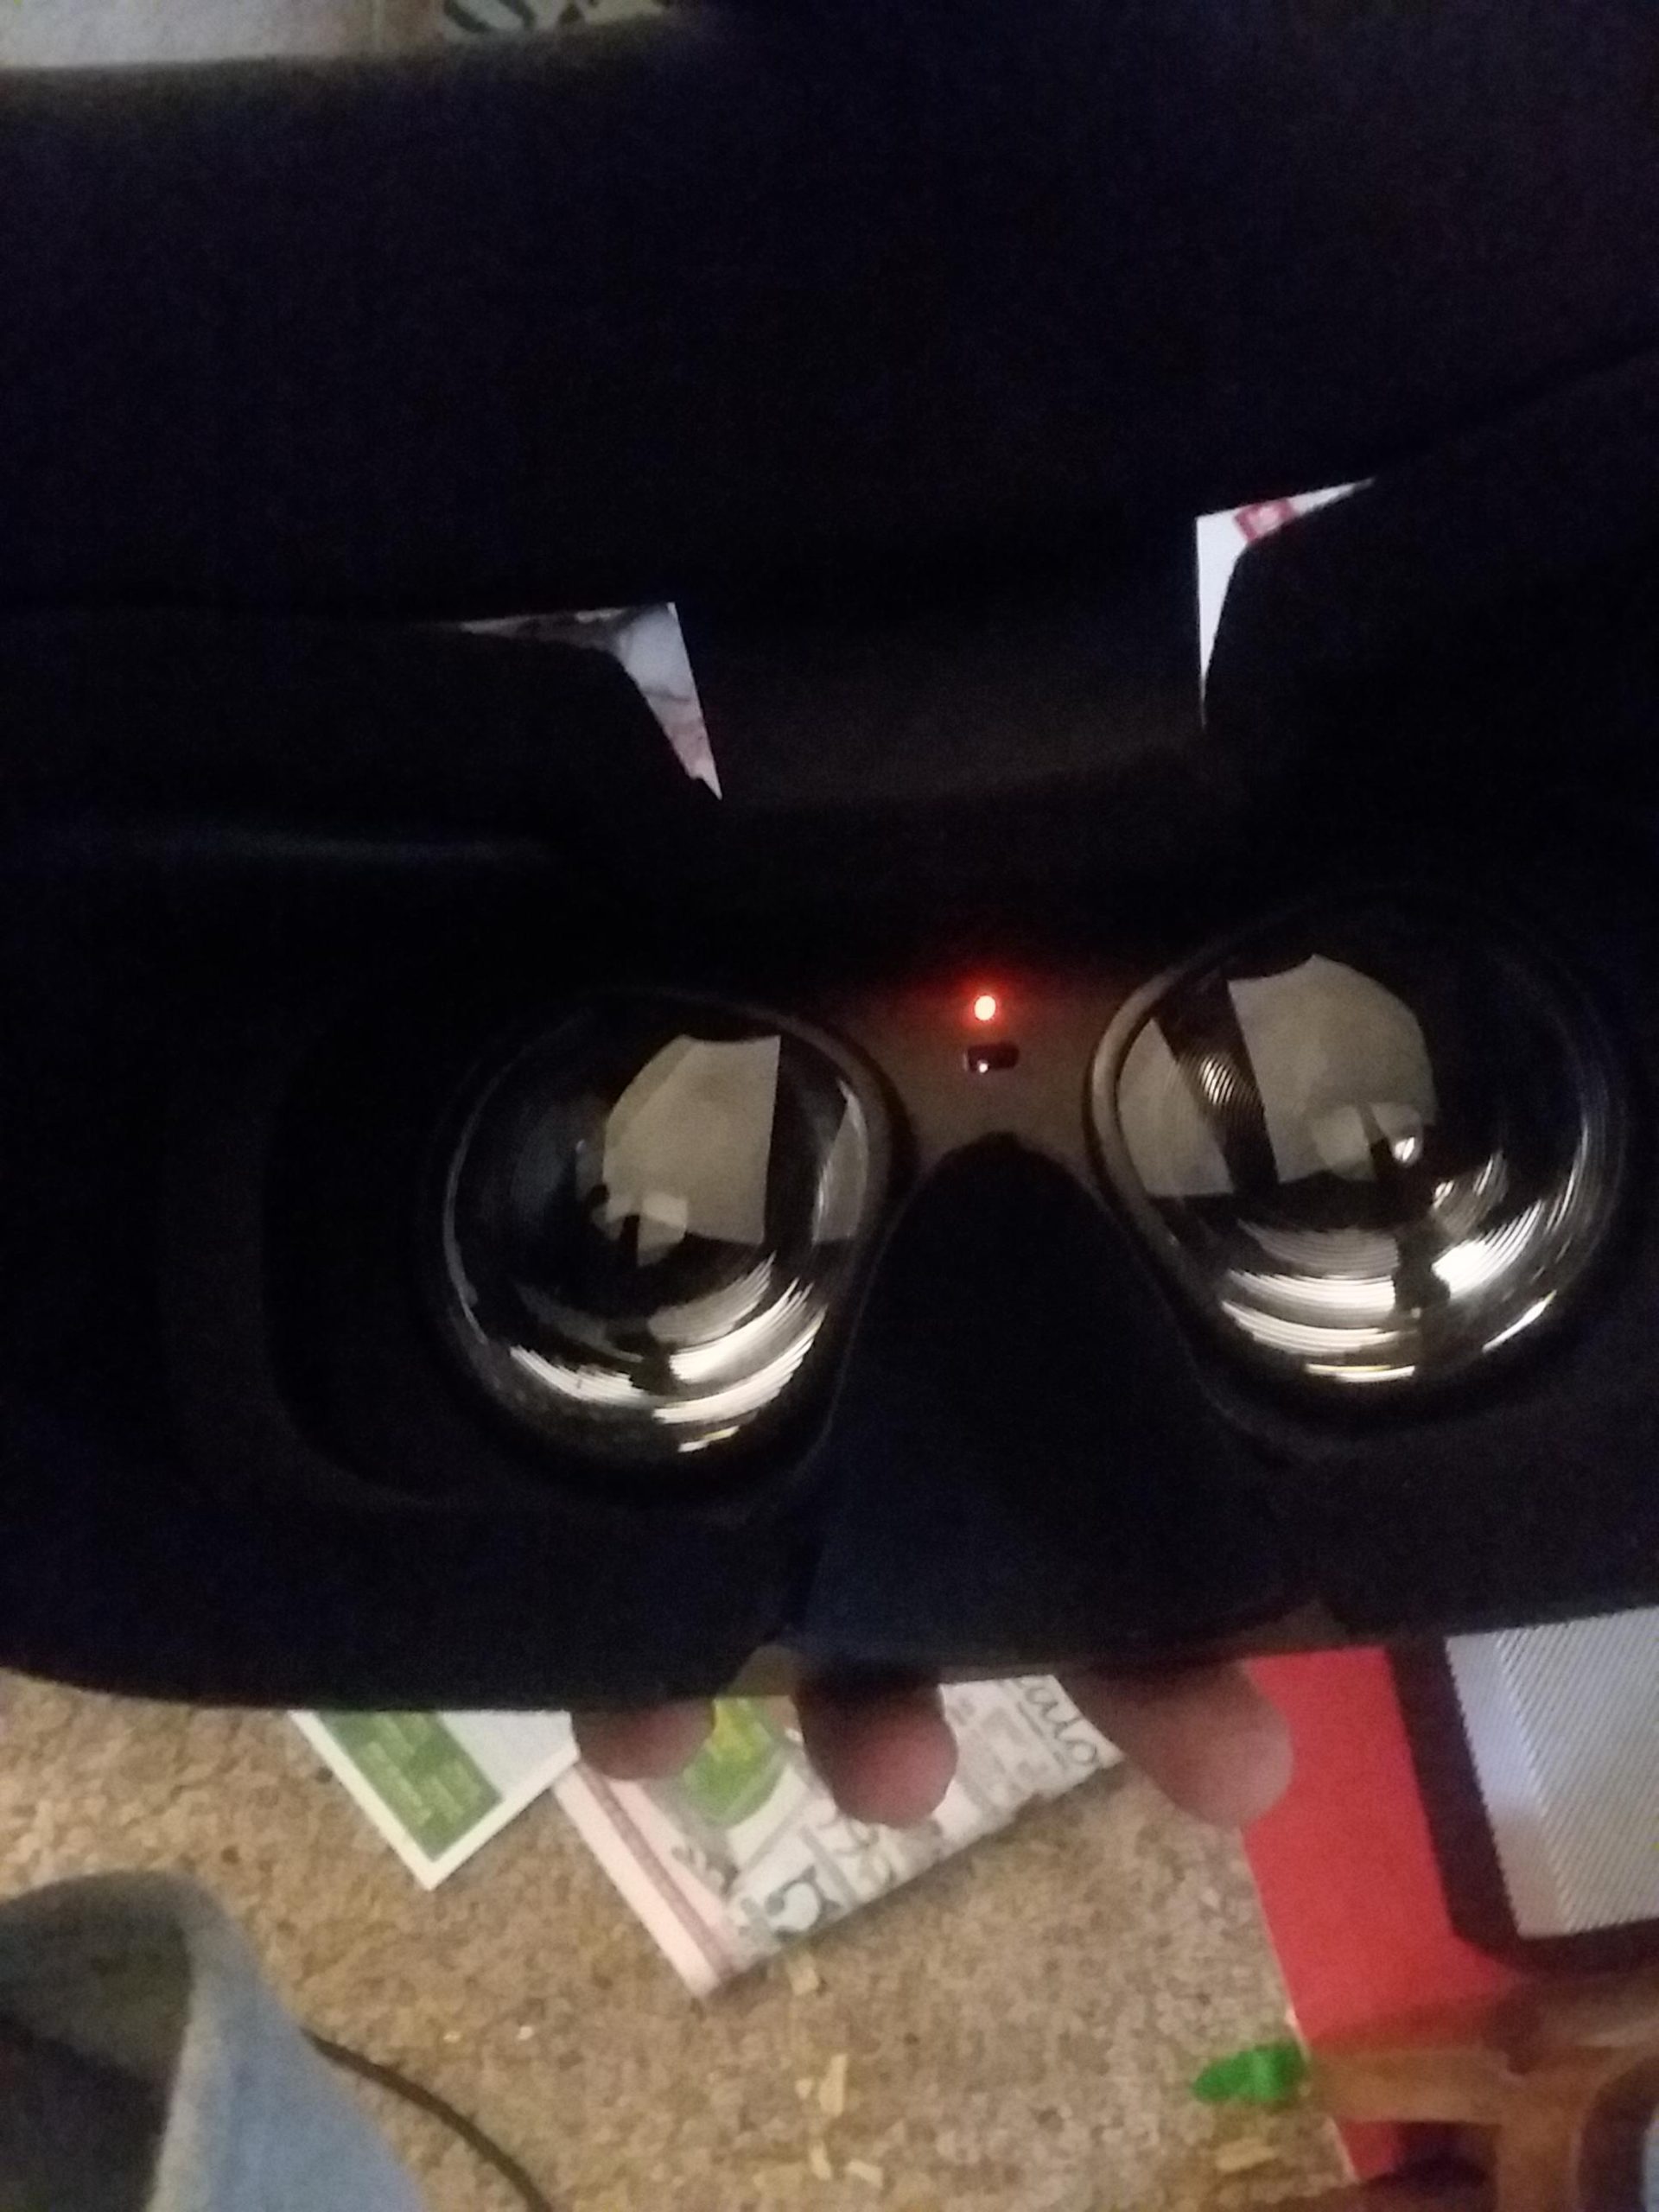 Oculus Rift Orange Light – What Does This Mean + Fix